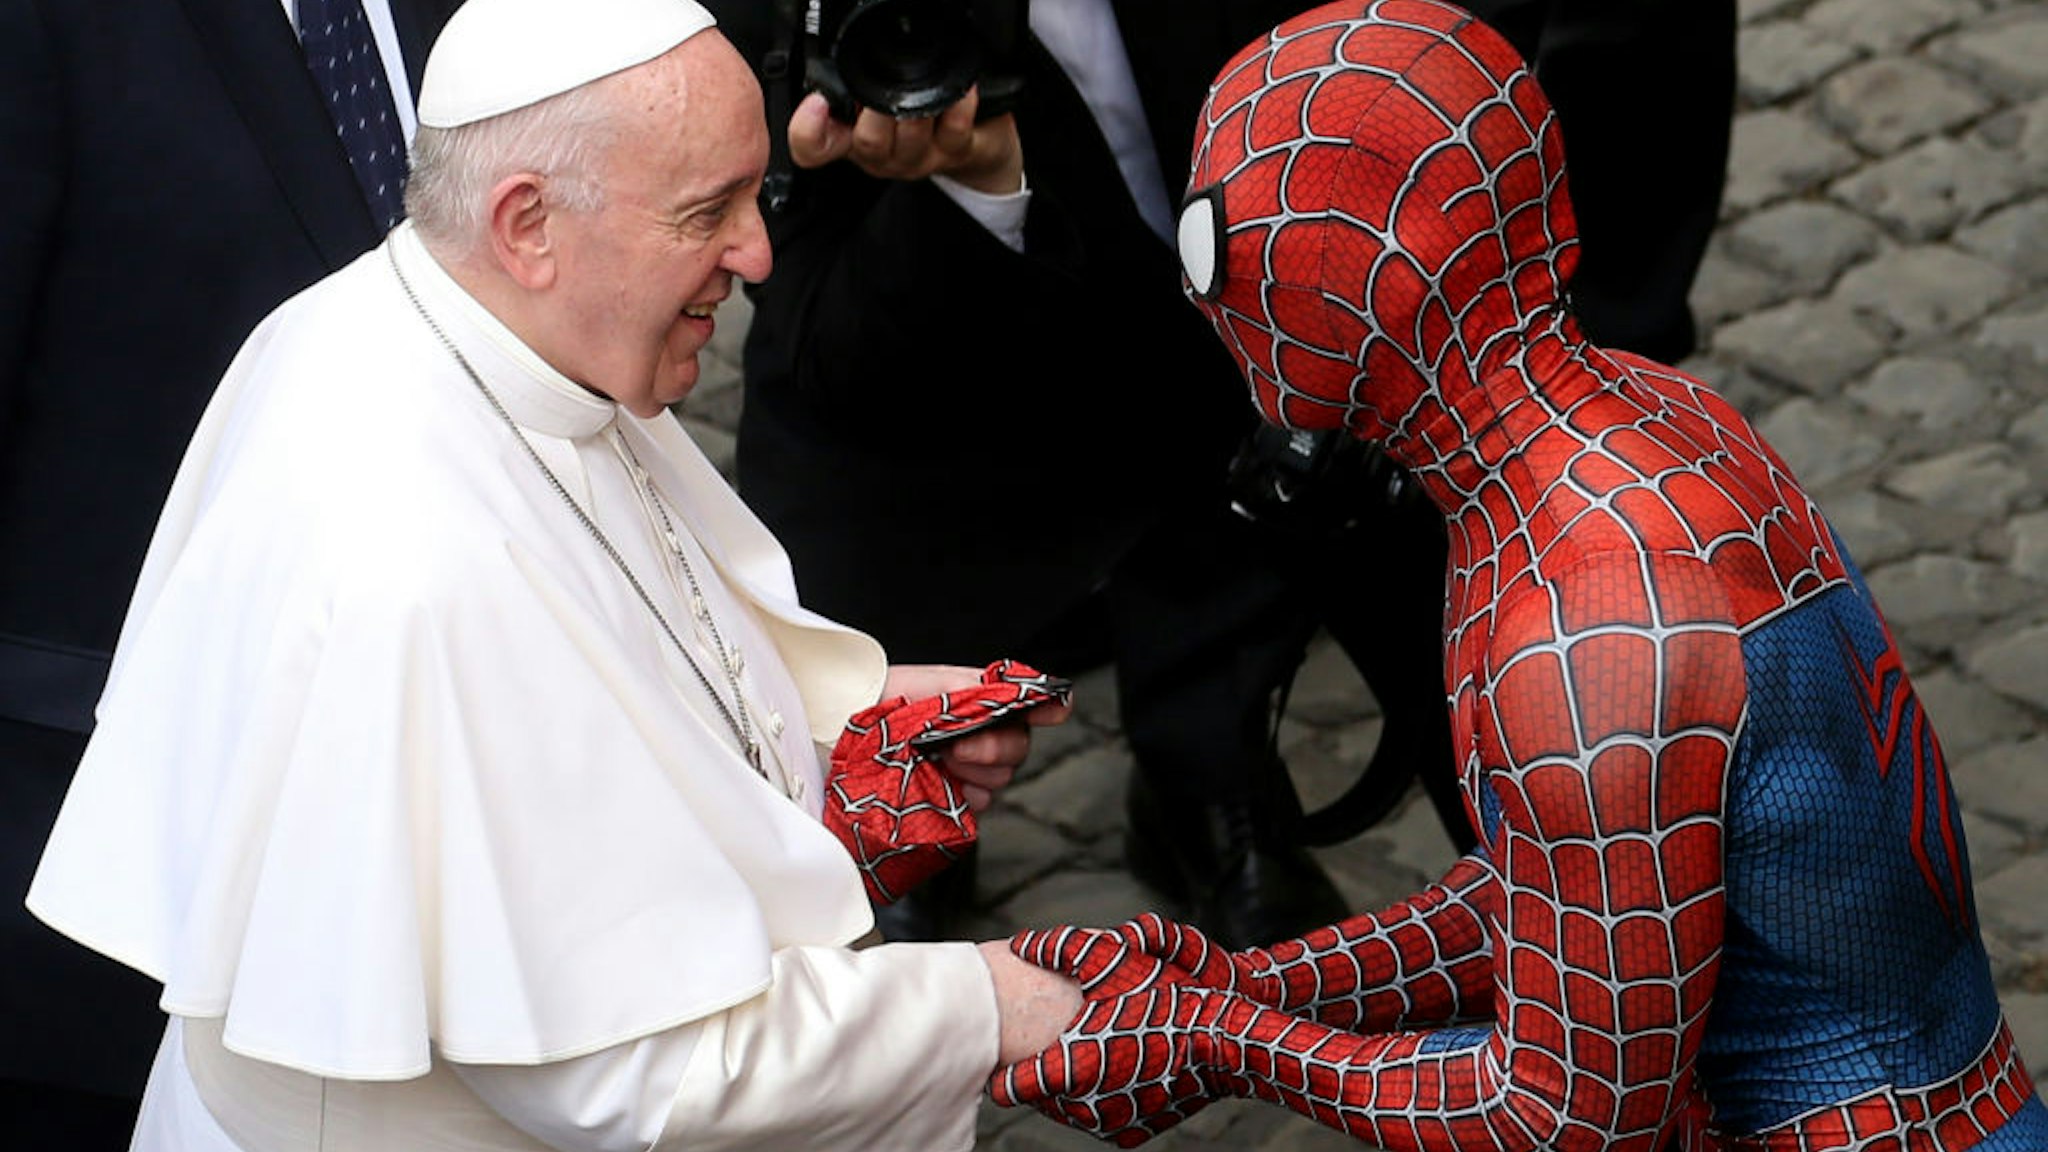 VATICAN CITY, VATICAN - JUNE 23: Pope Francis greets Mattia Villardita, a young man in the Spider-Man costume who makes children smile in the pediatric wards of hospitals, during his general audience at the courtyard of San Damaso on June 23, 2021 in Vatican City, Vatican. (Photo by